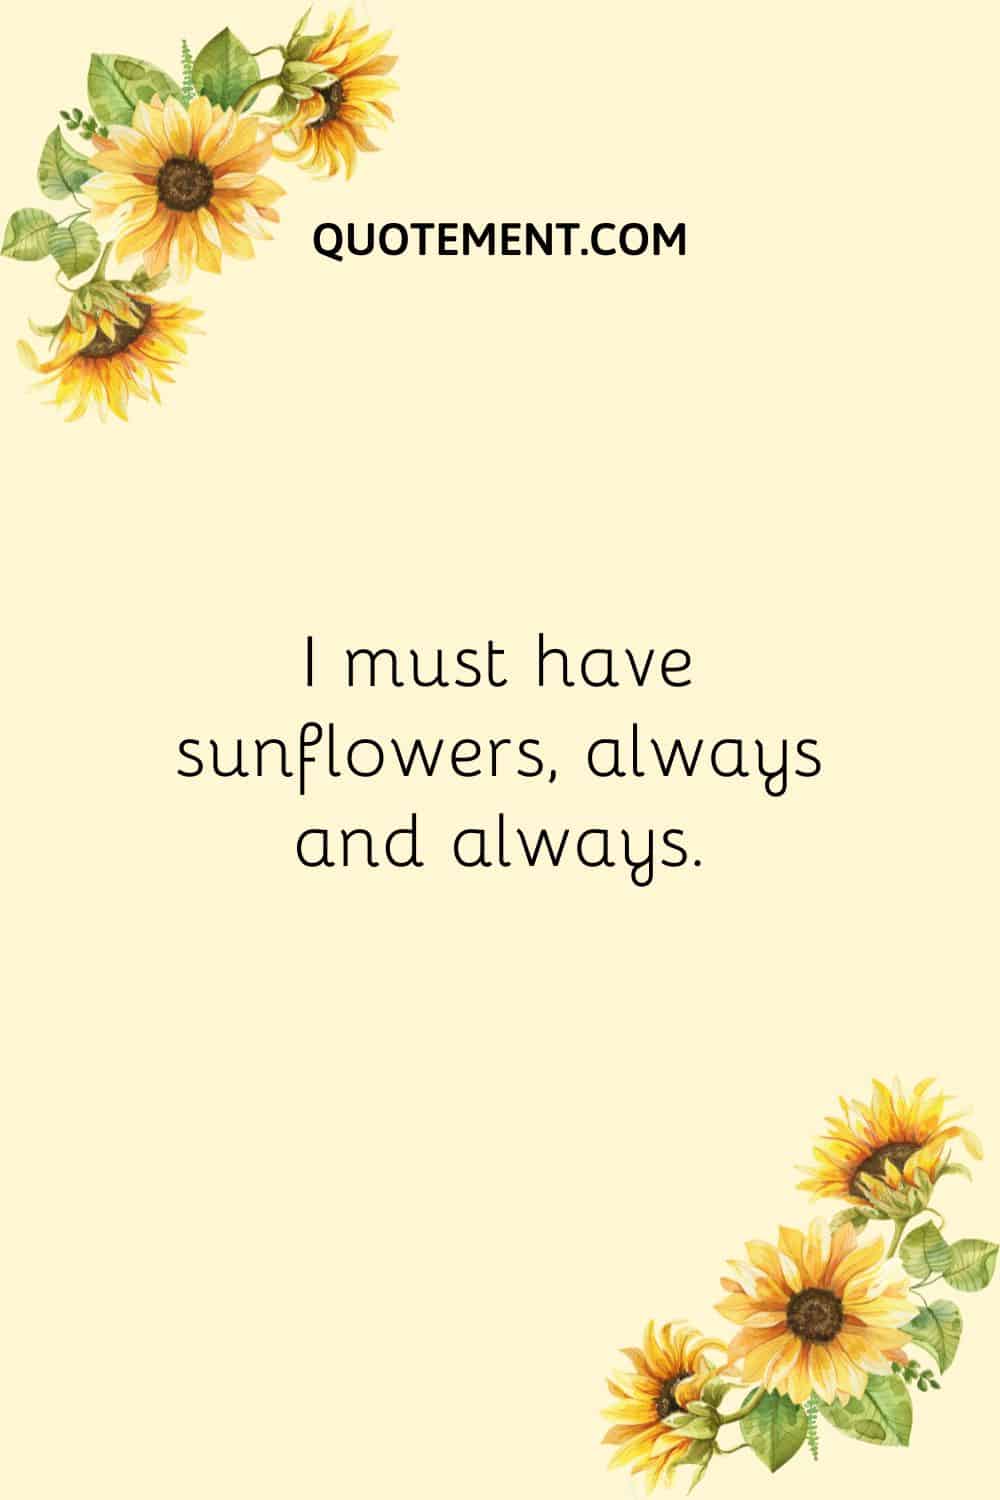 I must have sunflowers, always and always.